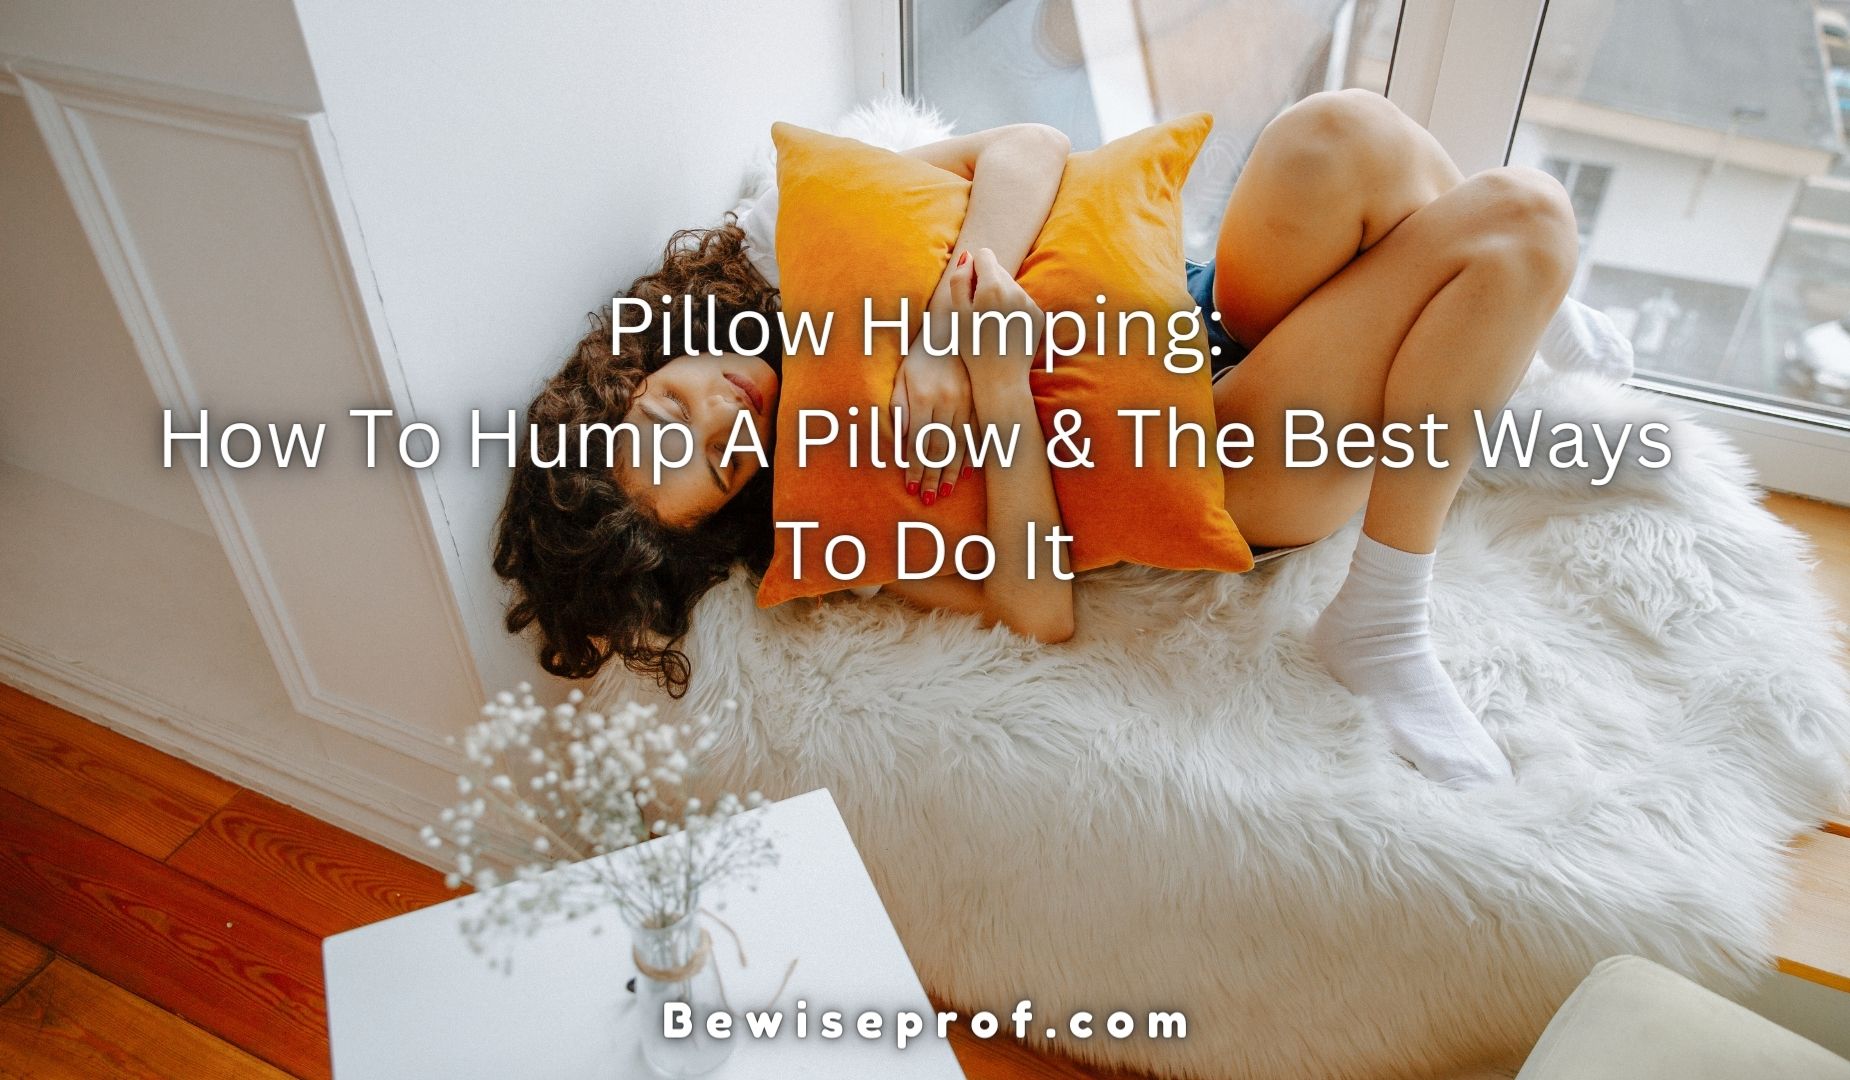 daniel banko recommends how do i hump a pillow pic